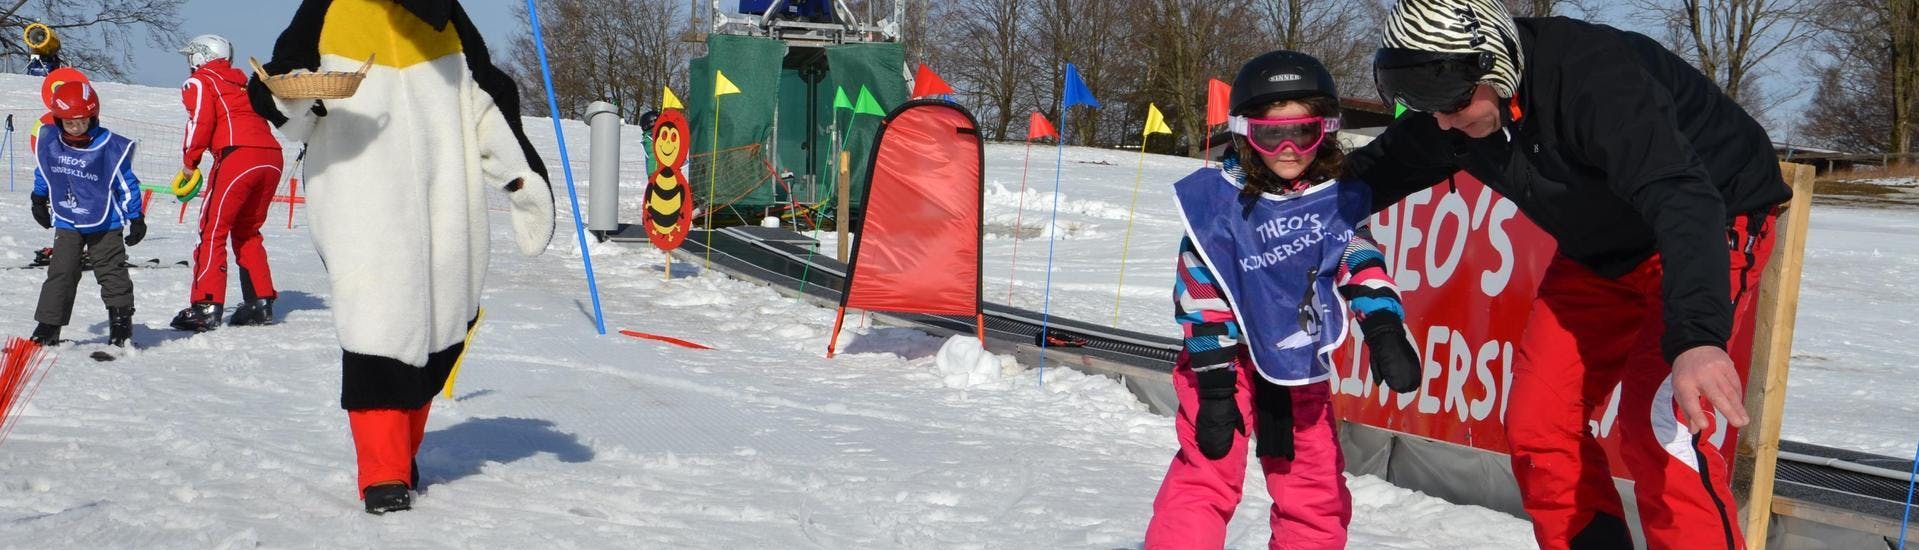 A child is learning to ski during one of the Private Ski Lessons for Kids (from 5 years) for All Levels with a caring instructor from the ski school DSV Skischule Züschen in the ski resort of Winterberg.